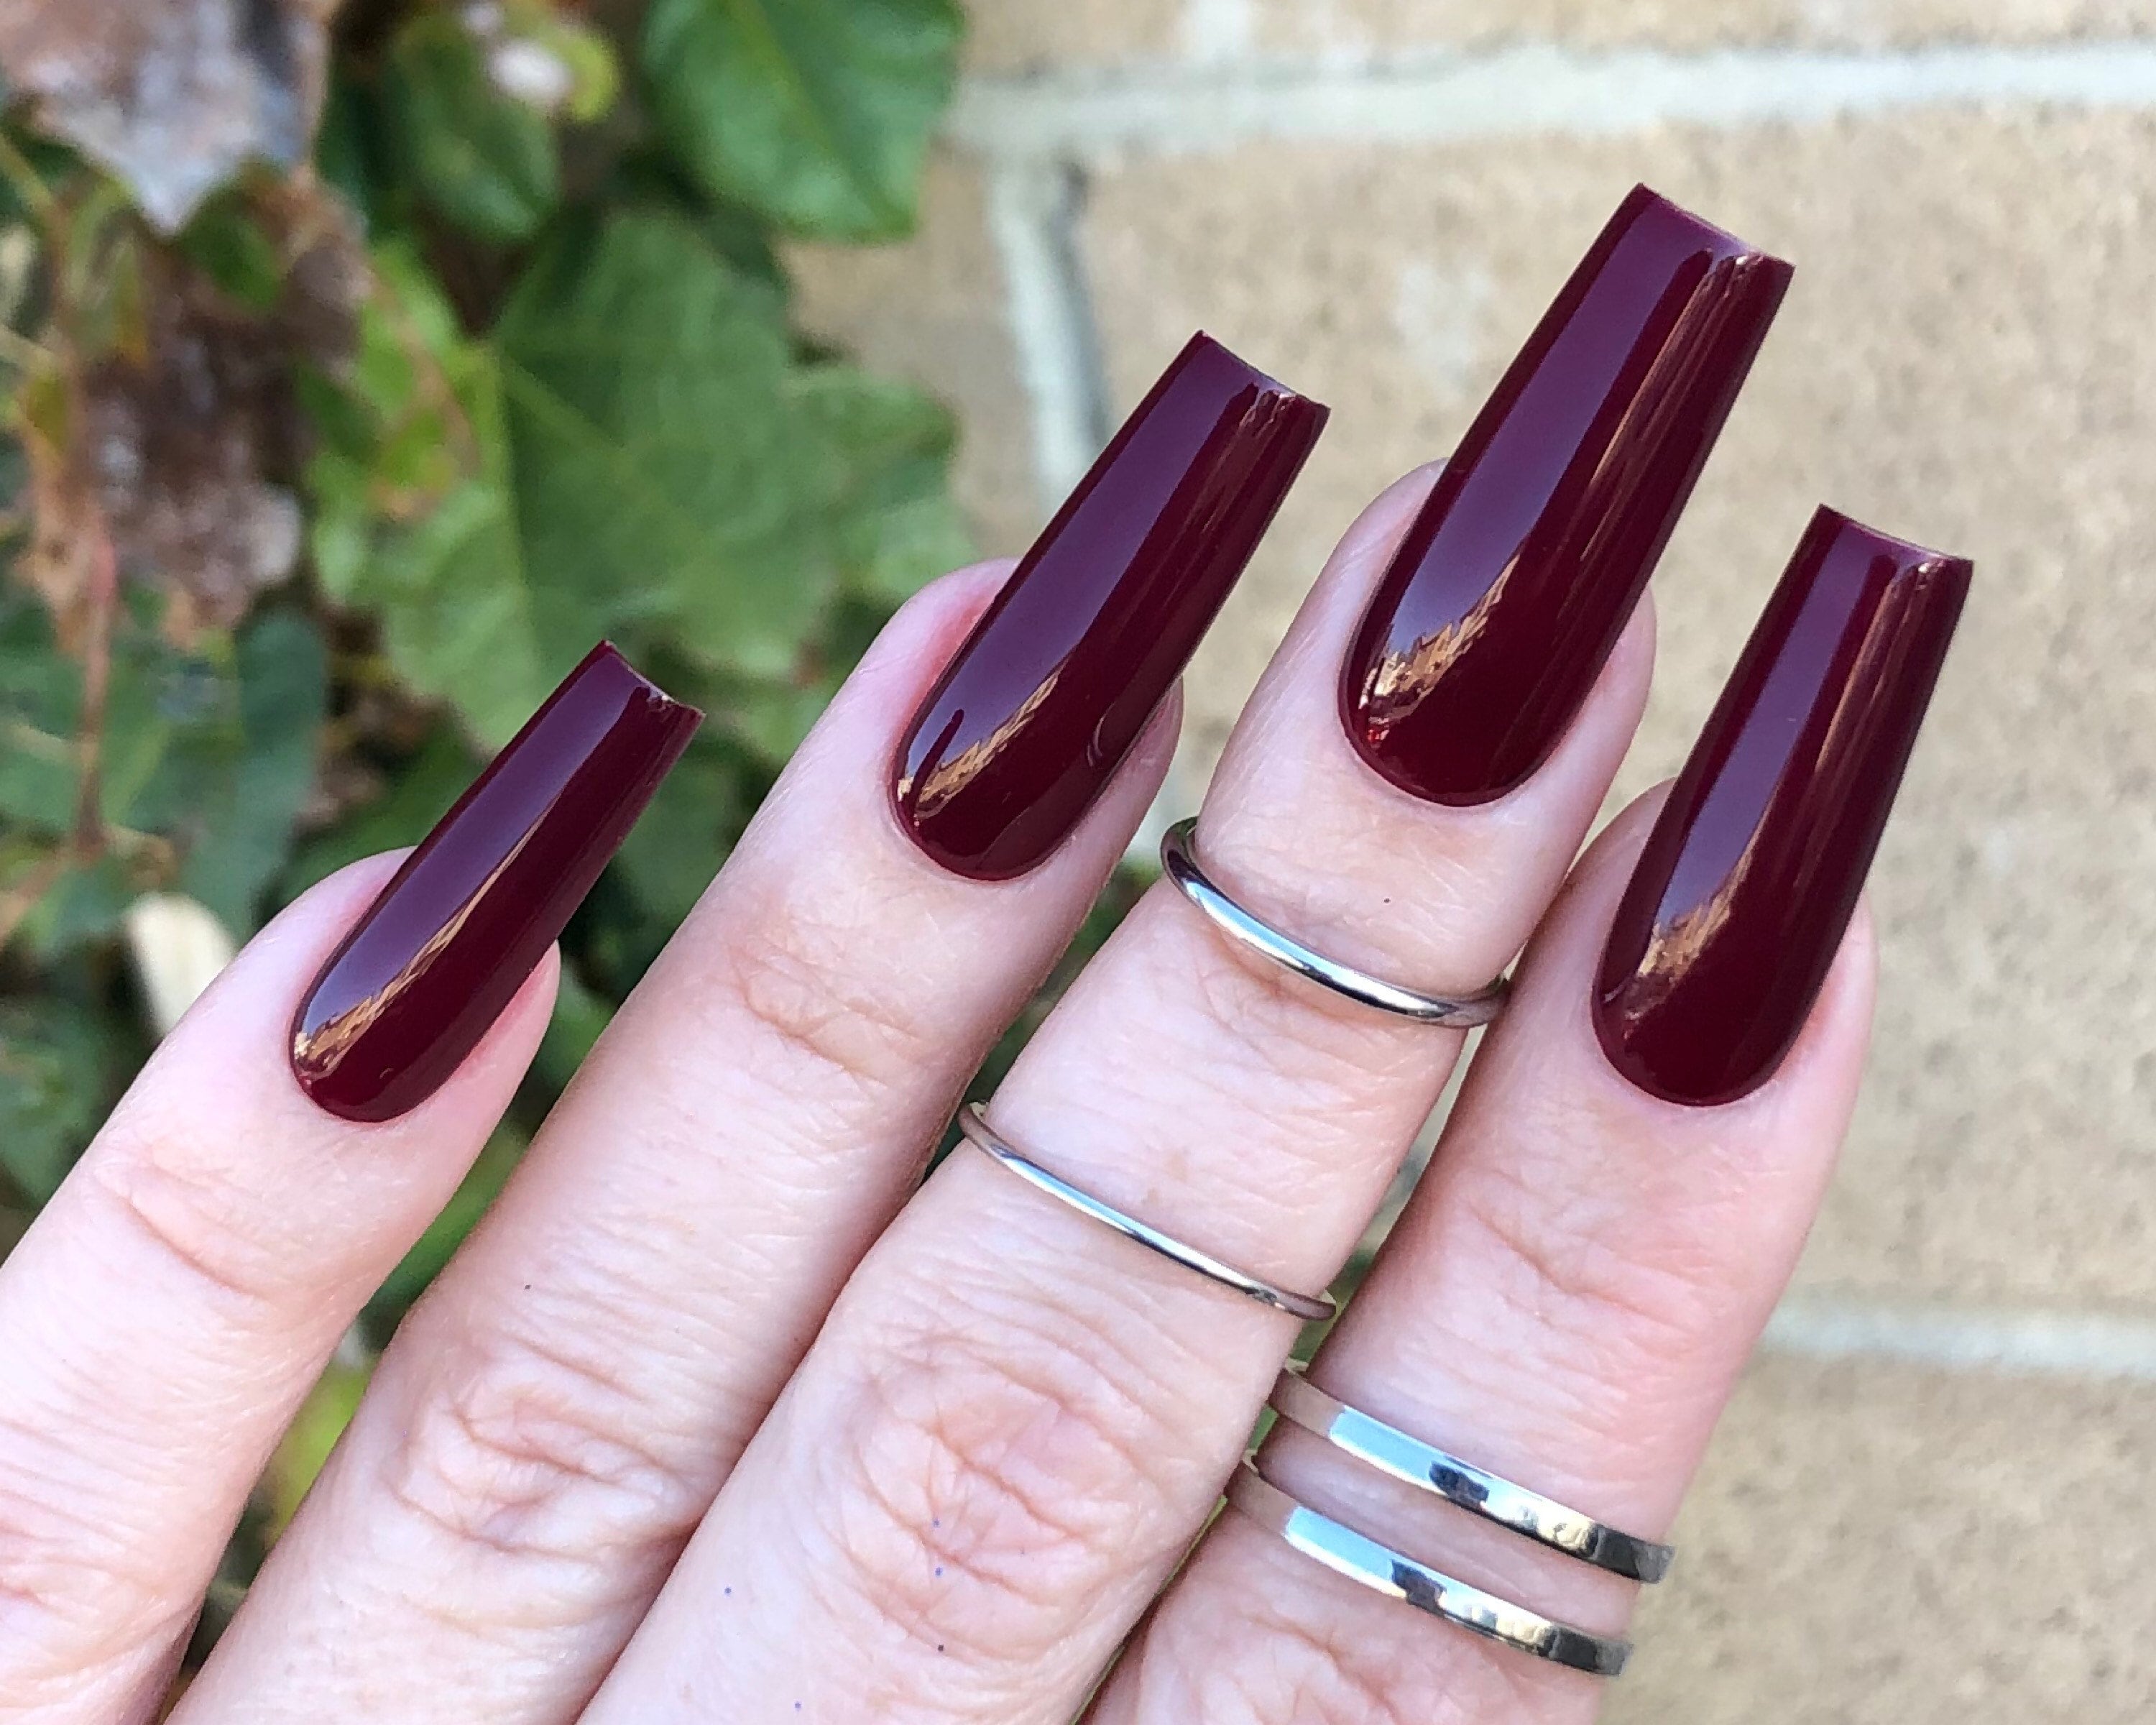 5. Burgundy and White Nail Art - wide 7